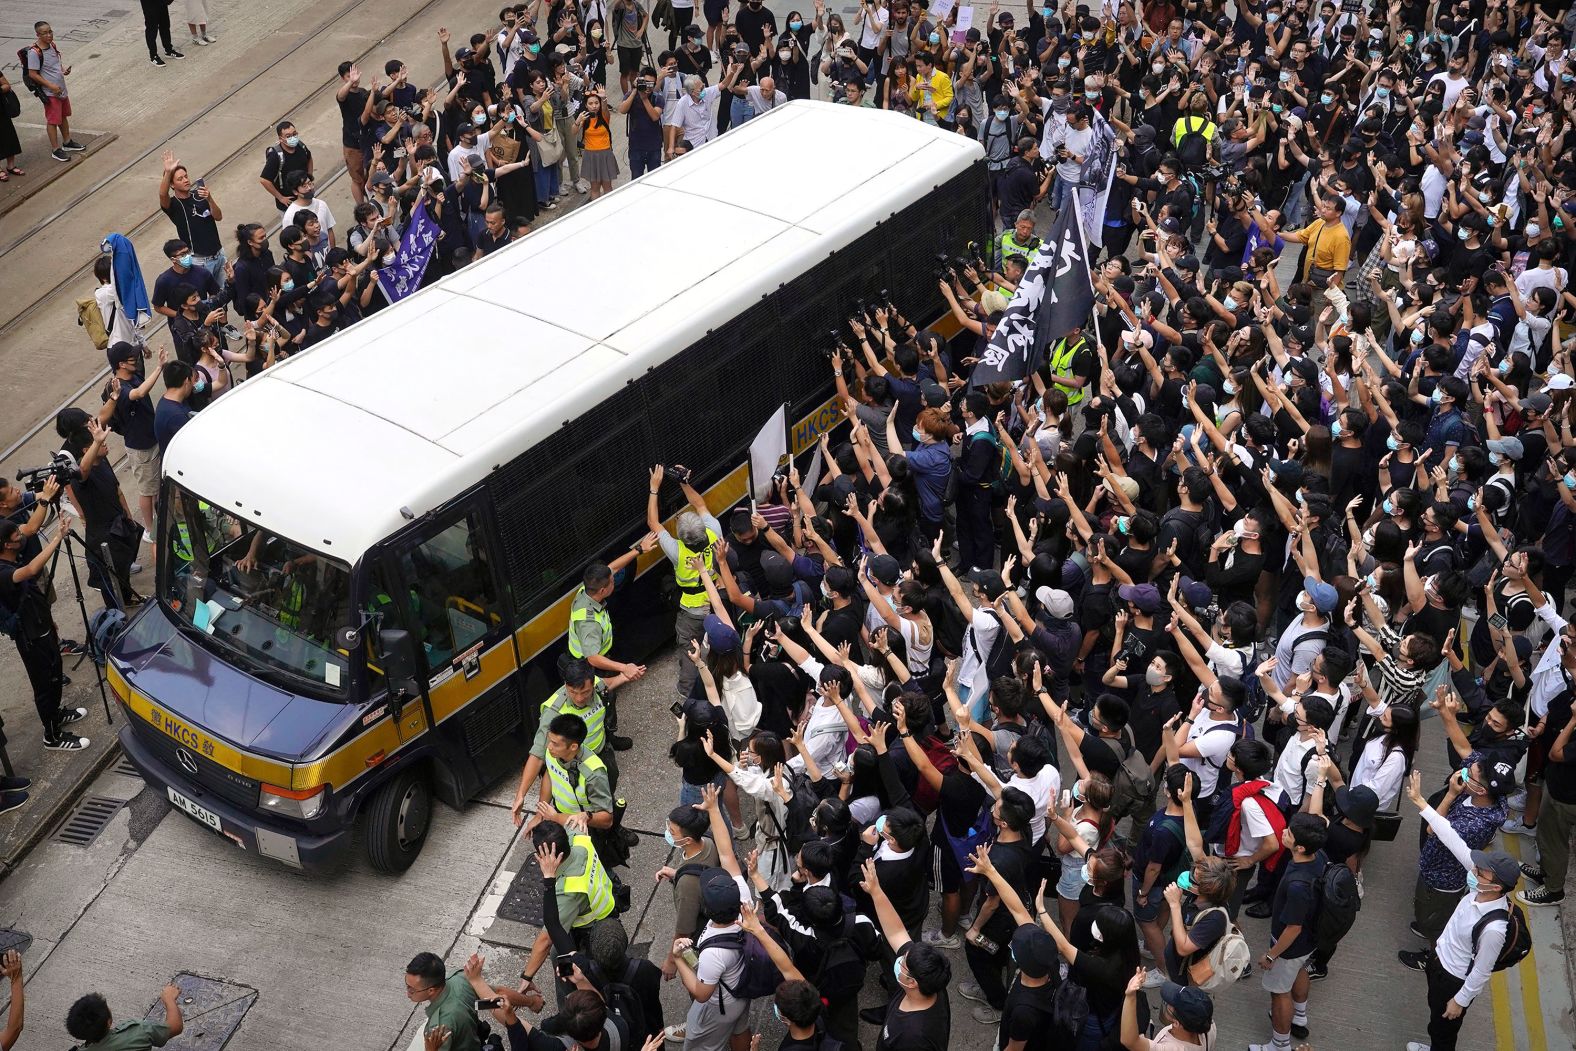 Supporters surround a police bus carrying political activist Edward Leung as it leaves the High Court in Hong Kong on Wednesday, October 9. Several hundred masked protesters gathered at Hong Kong's High Court for the appeal hearing of Leung, <a href="index.php?page=&url=https%3A%2F%2Fwww.cnn.com%2F2018%2F06%2F11%2Fasia%2Fedward-leung-hong-kong-jailed-intl%2Findex.html" target="_blank">who was sentenced to six years in prison</a> for his part in a violent clash with police.